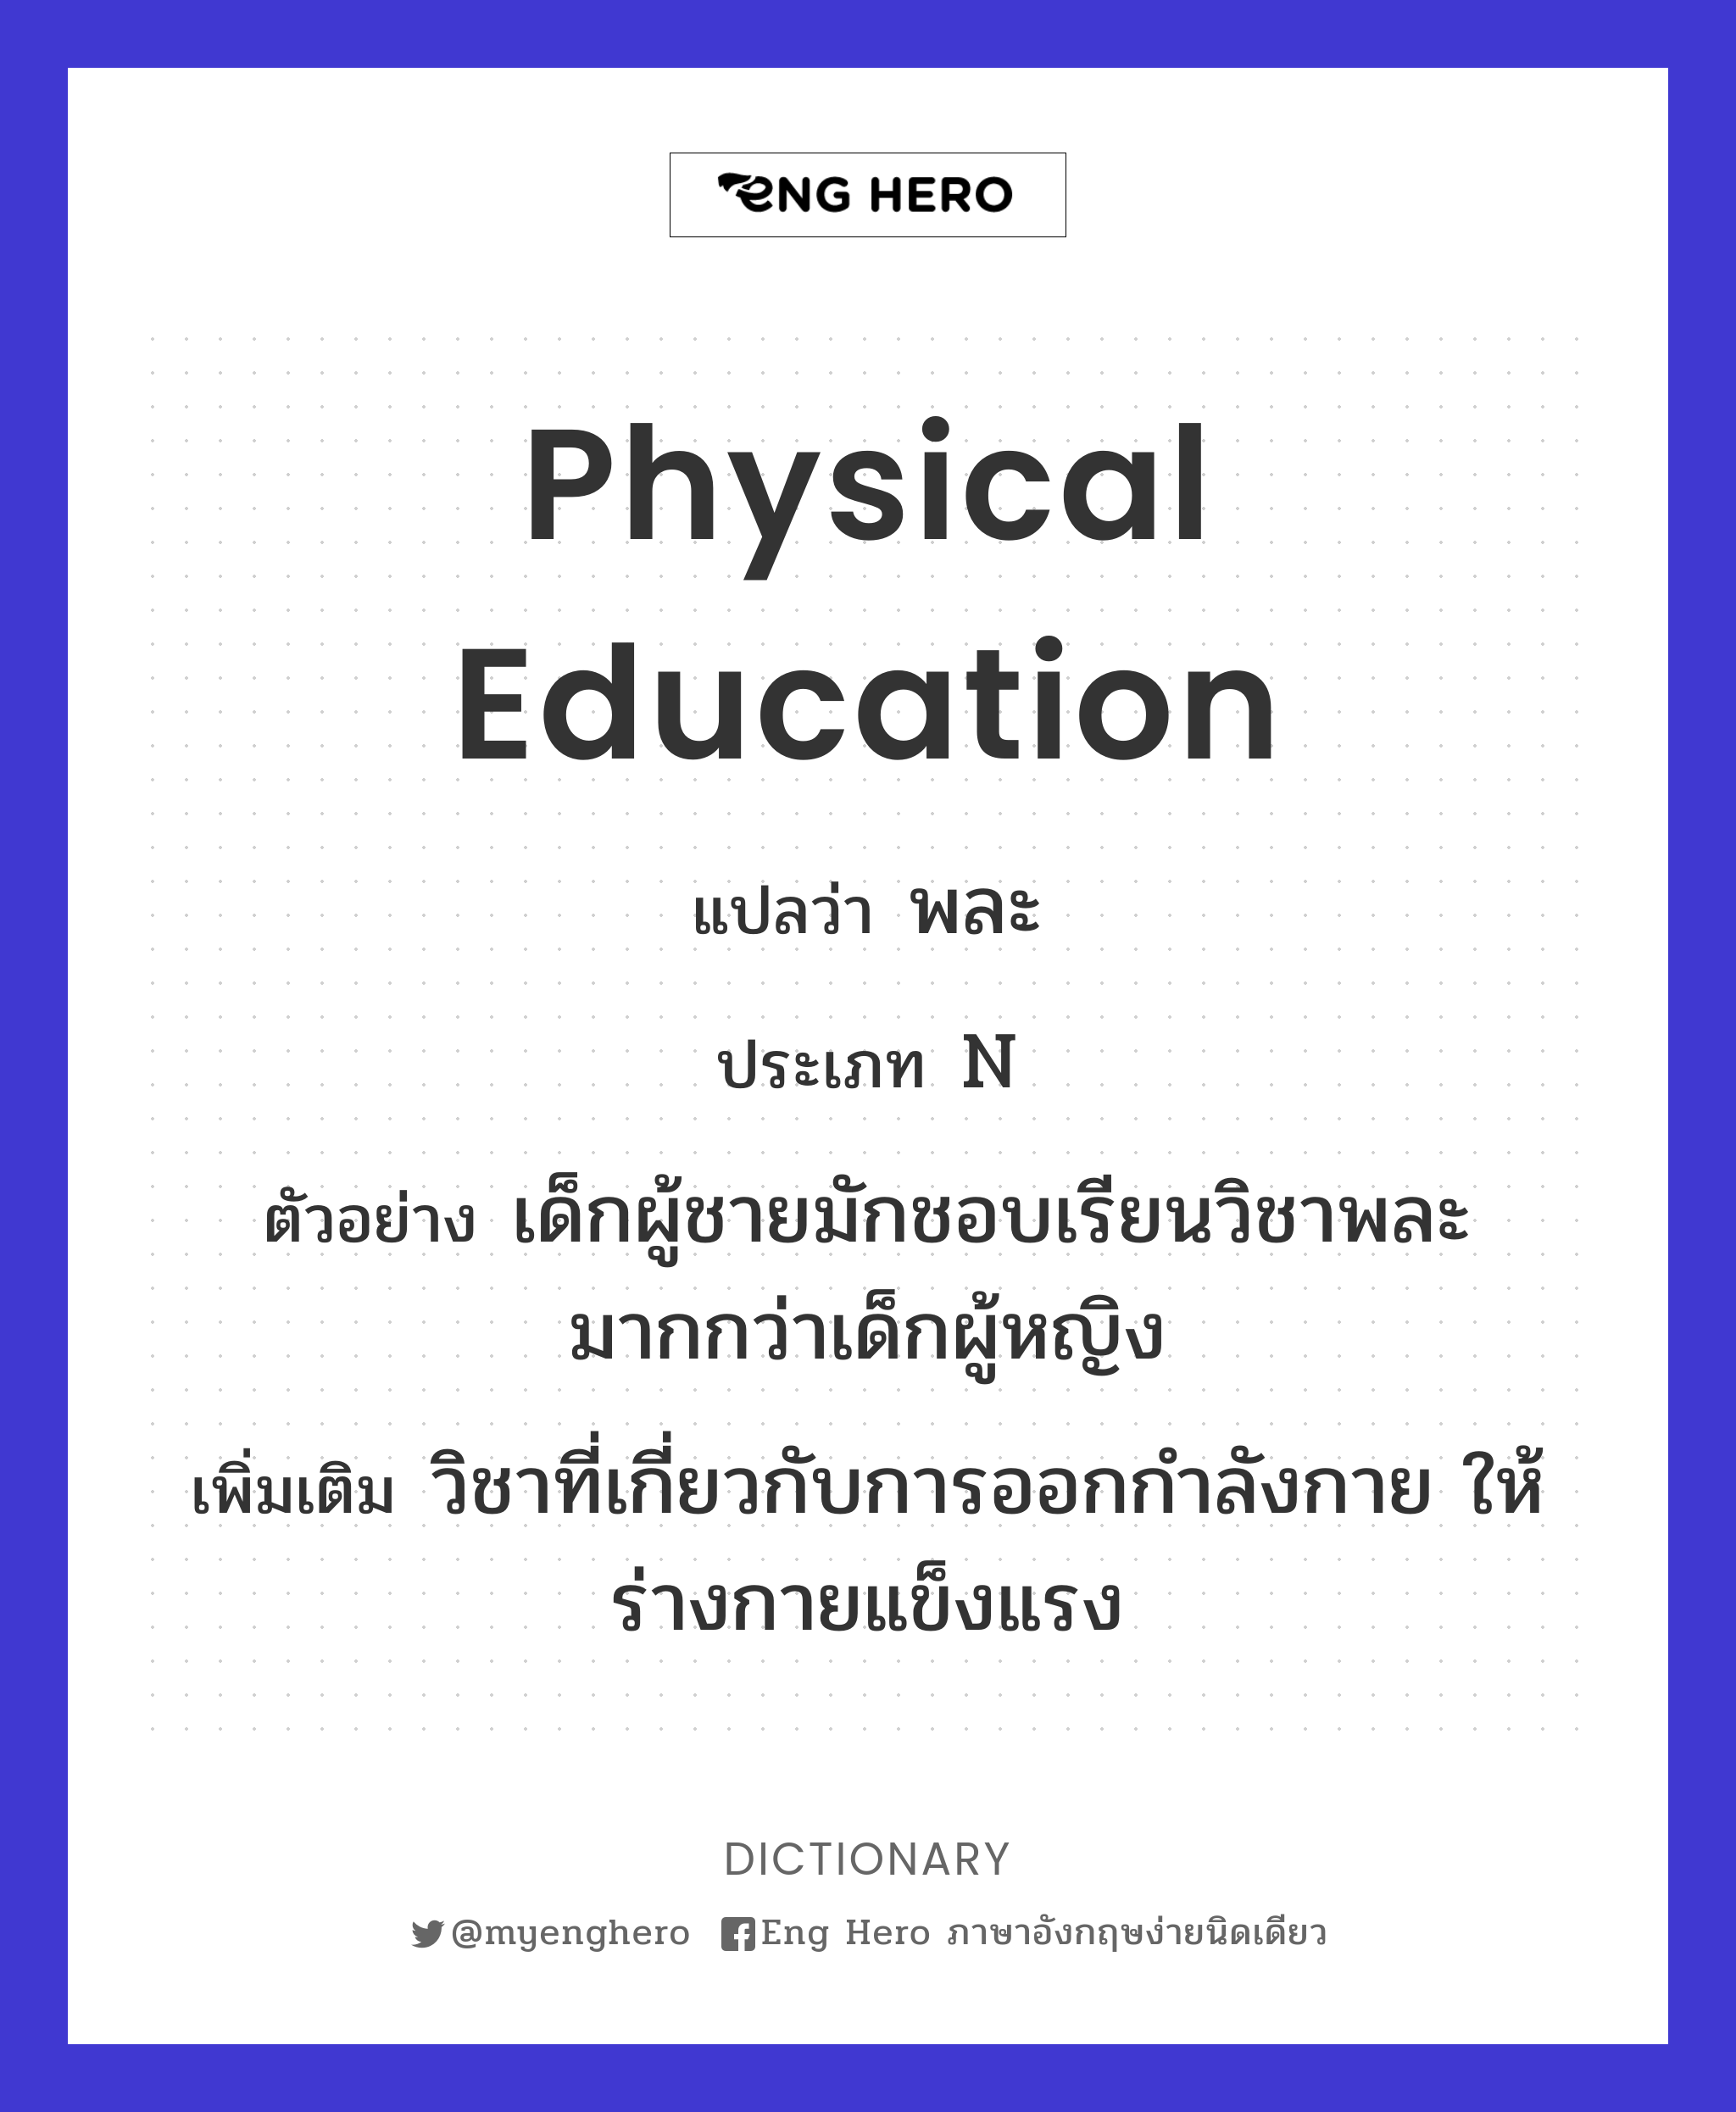 physical education